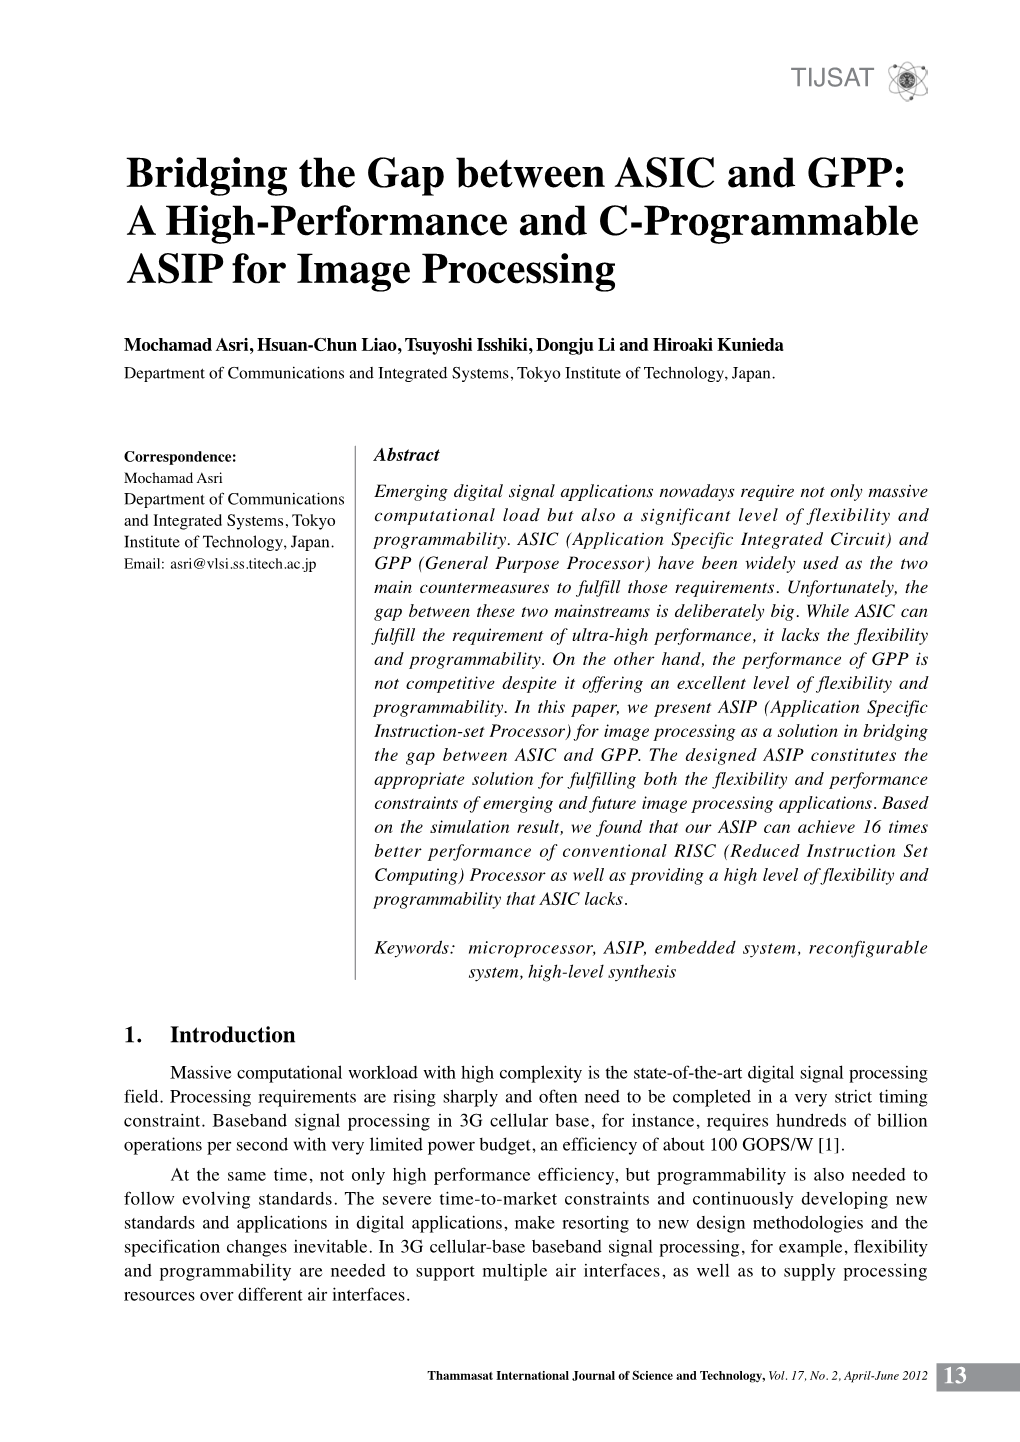 Bridging the Gap Between ASIC and GPP: a High-Performance and C-Programmable ASIP for Image Processing